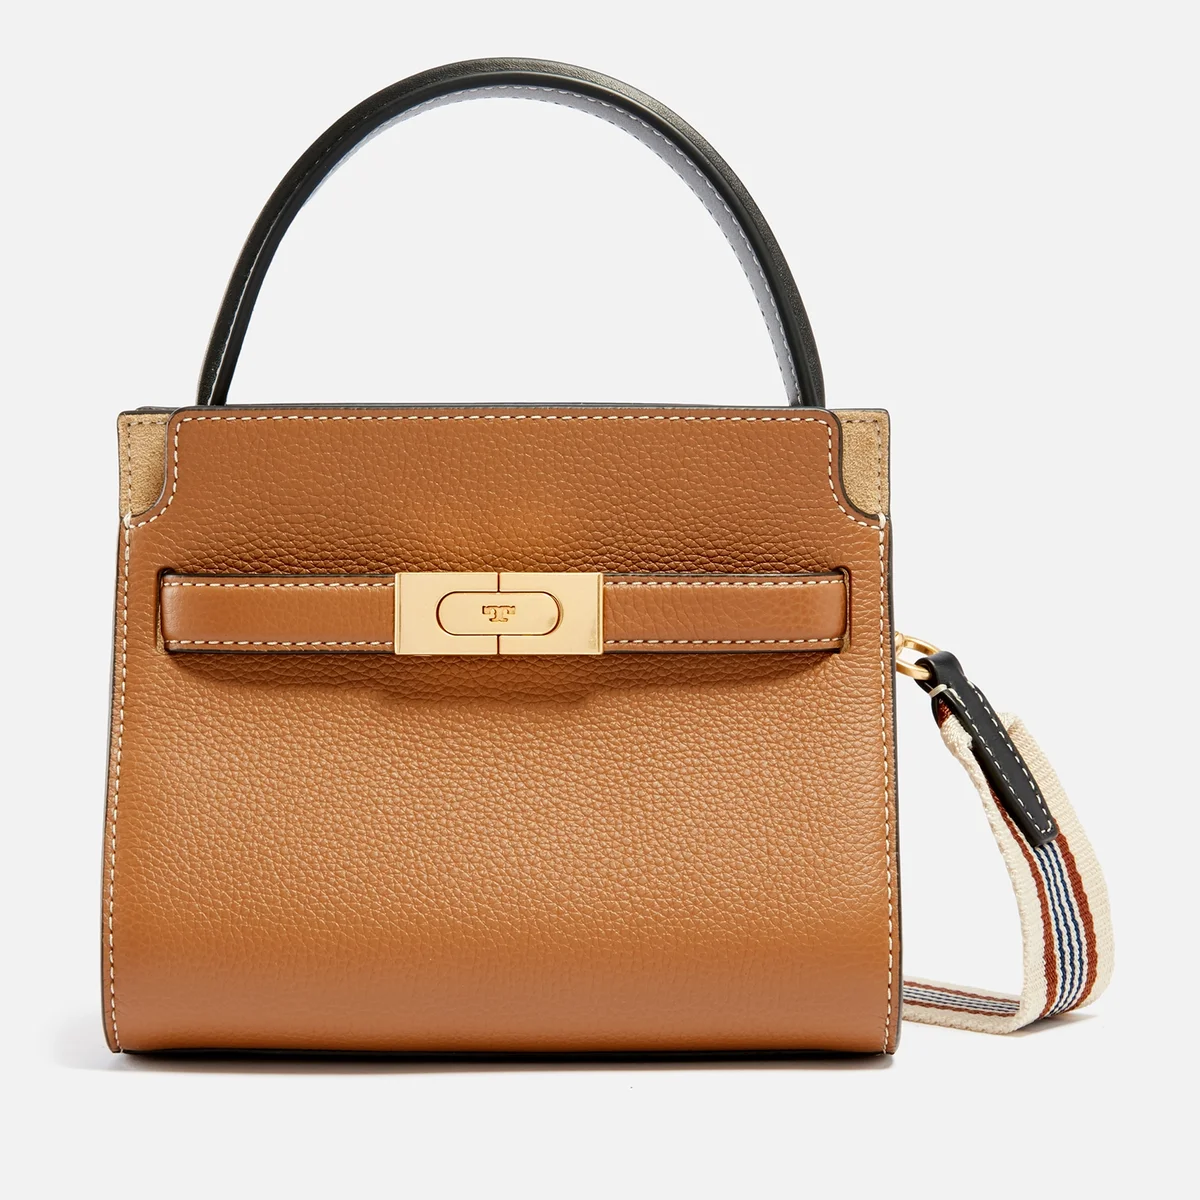 Tory Burch Lee Radziwill Leather and Suede Bag Image 1